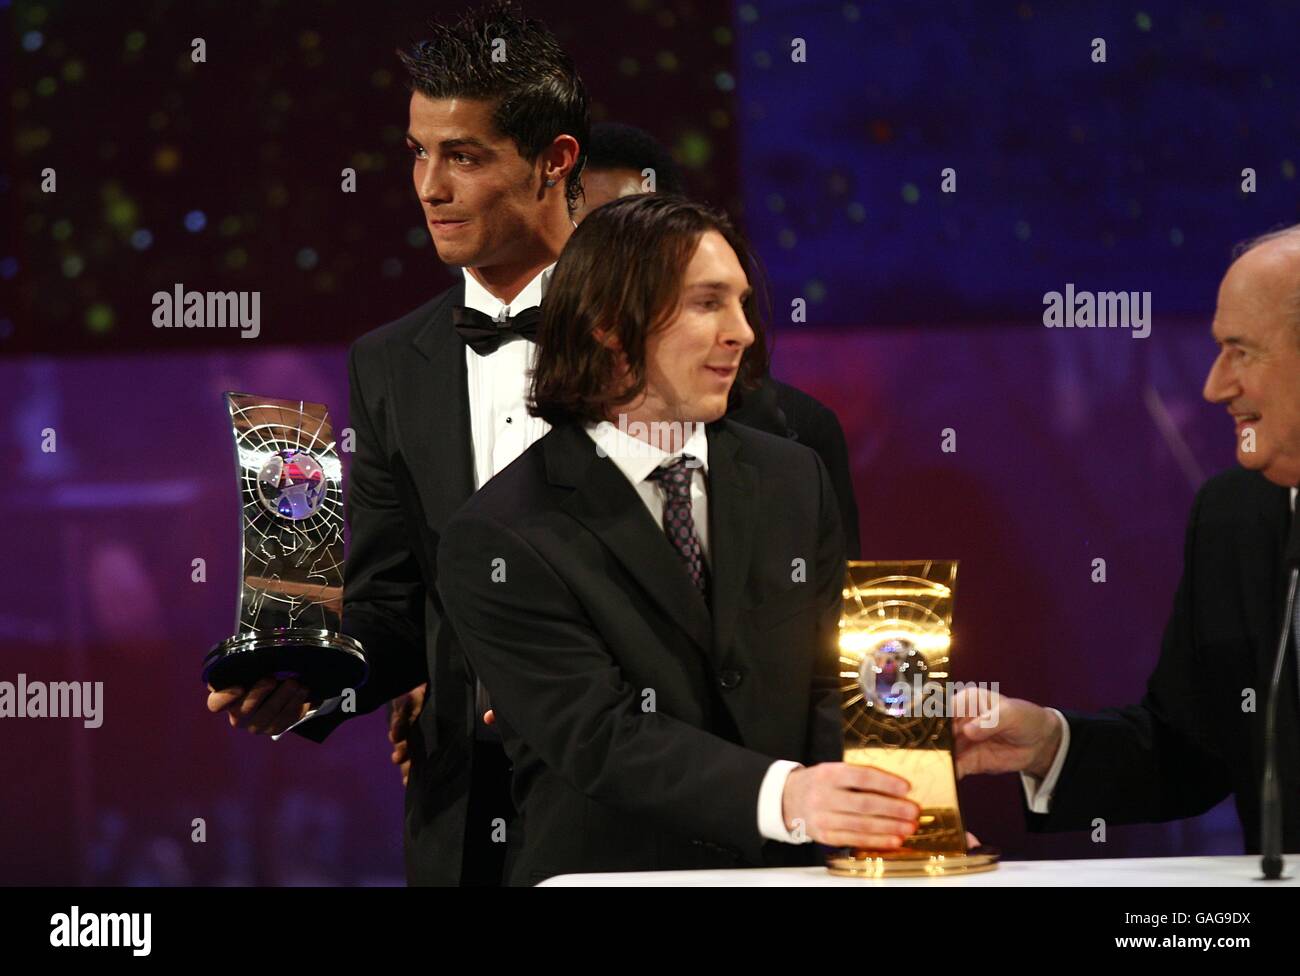 Barcelona's Lionel Messi is handed the wrong trophy after being named runner up in the FIFA World Player of the Year award at the FIFA World Player Gala Stock Photo